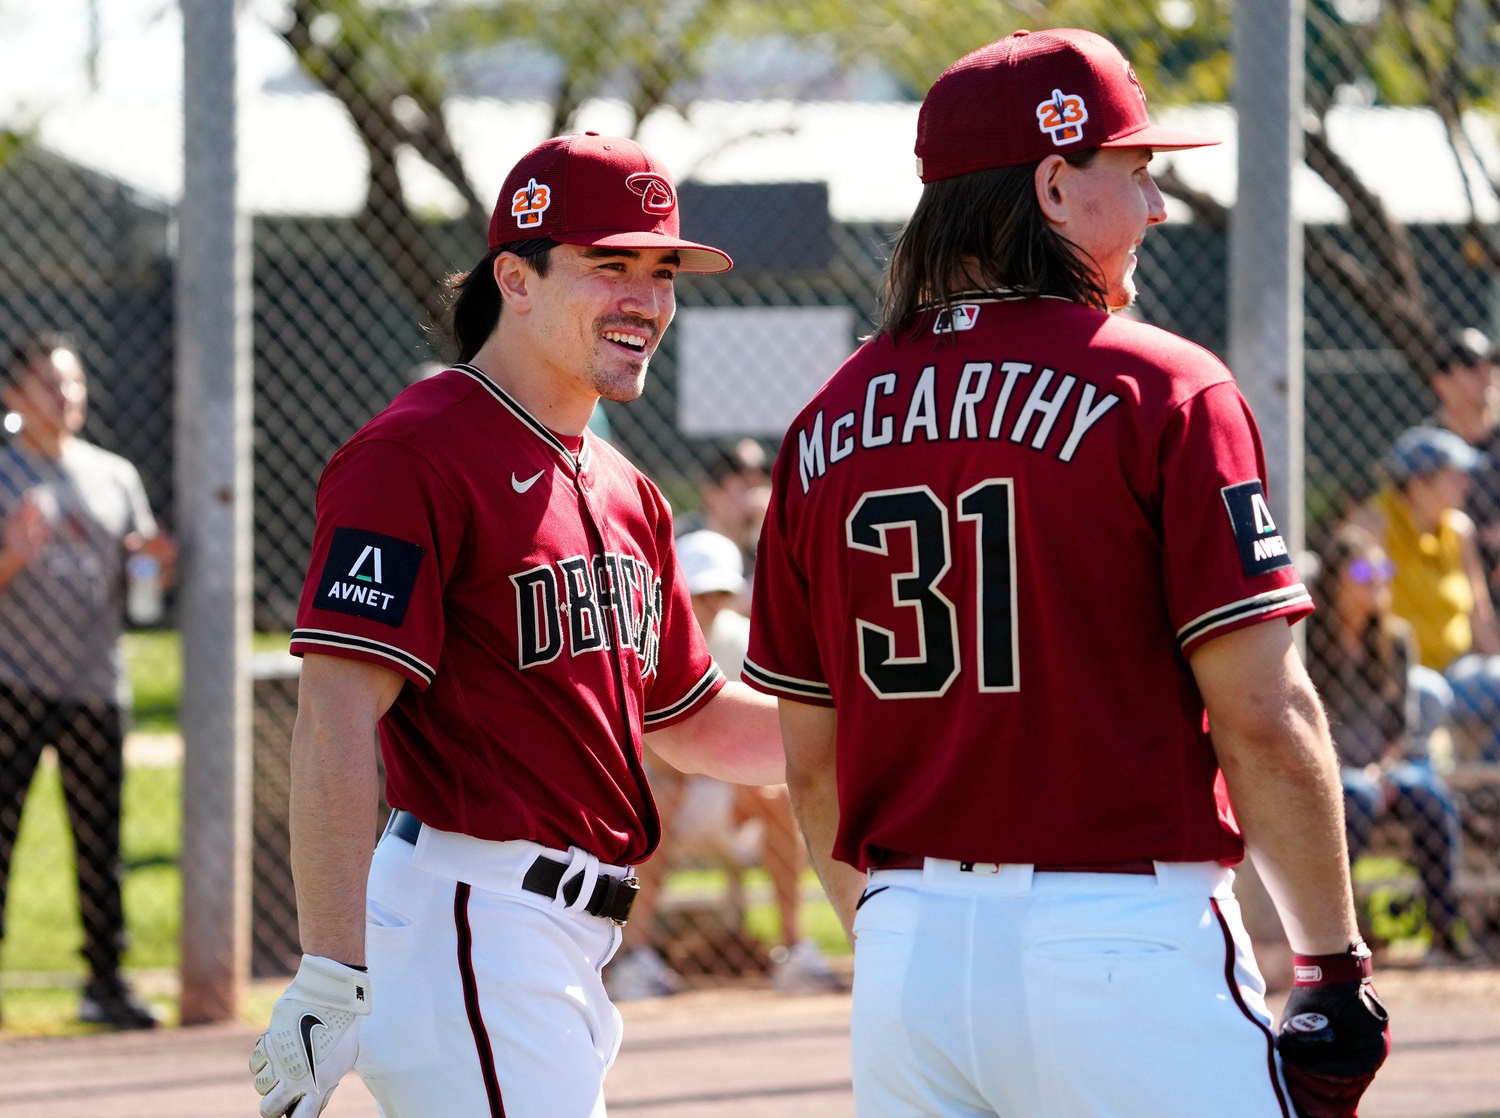 Diamondbacks' young players 'work in progress' jumping up from minors